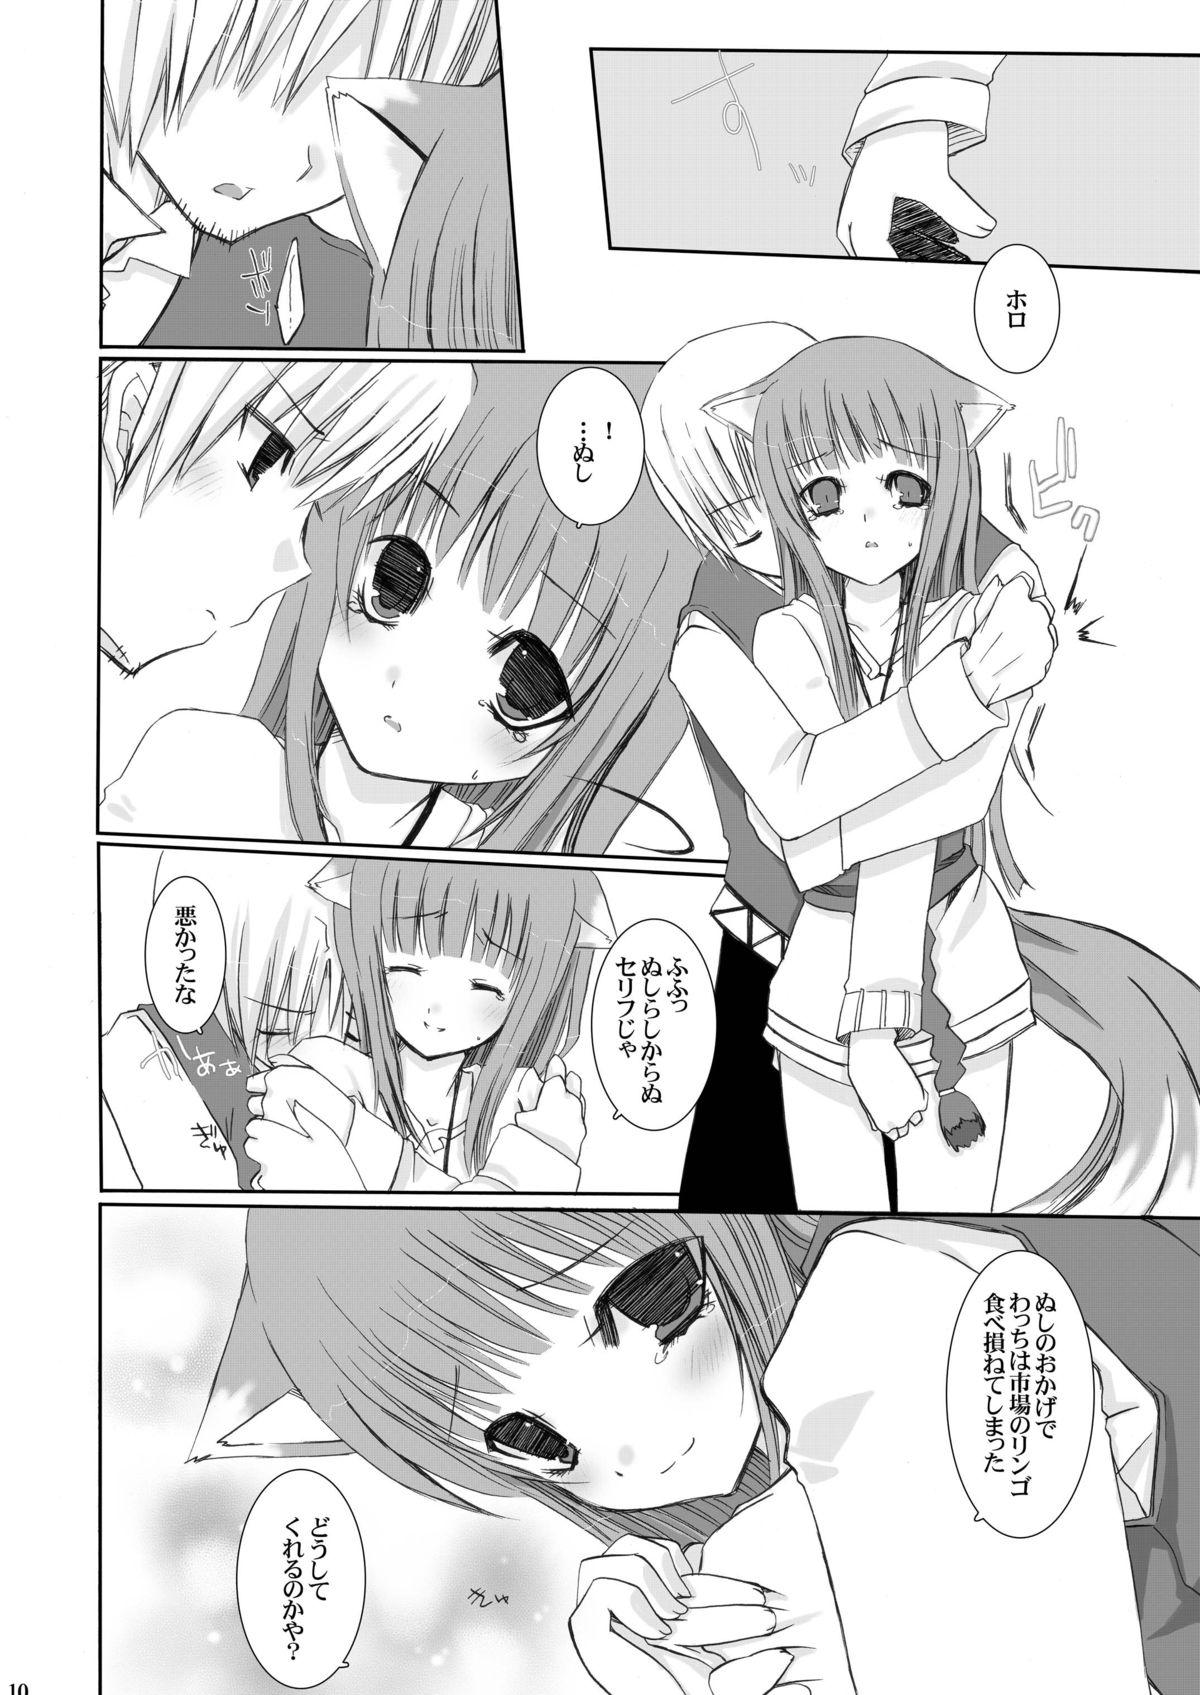 Muscles Fukigen na Ookami - Spice and wolf Spy Camera - Page 10